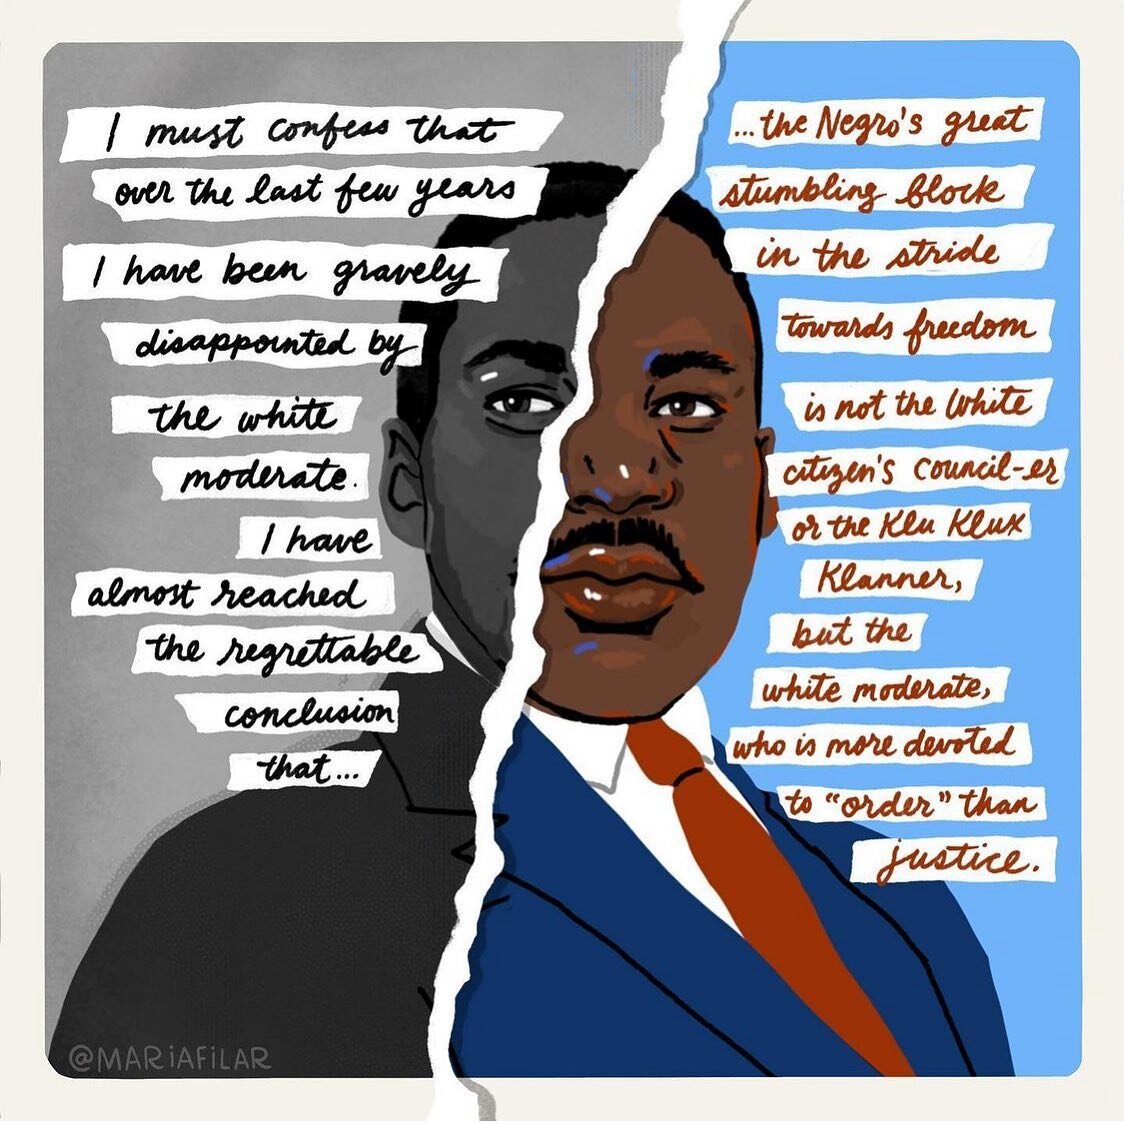 Honoring Dr. Martin Luther King, Jr. today &mdash; his life, his work, his purpose. If you haven&rsquo;t read some of his work like &ldquo;Letter from a Birmingham Jail&rdquo; take the time to familiarize yourself with his message. Thank you @mariafi